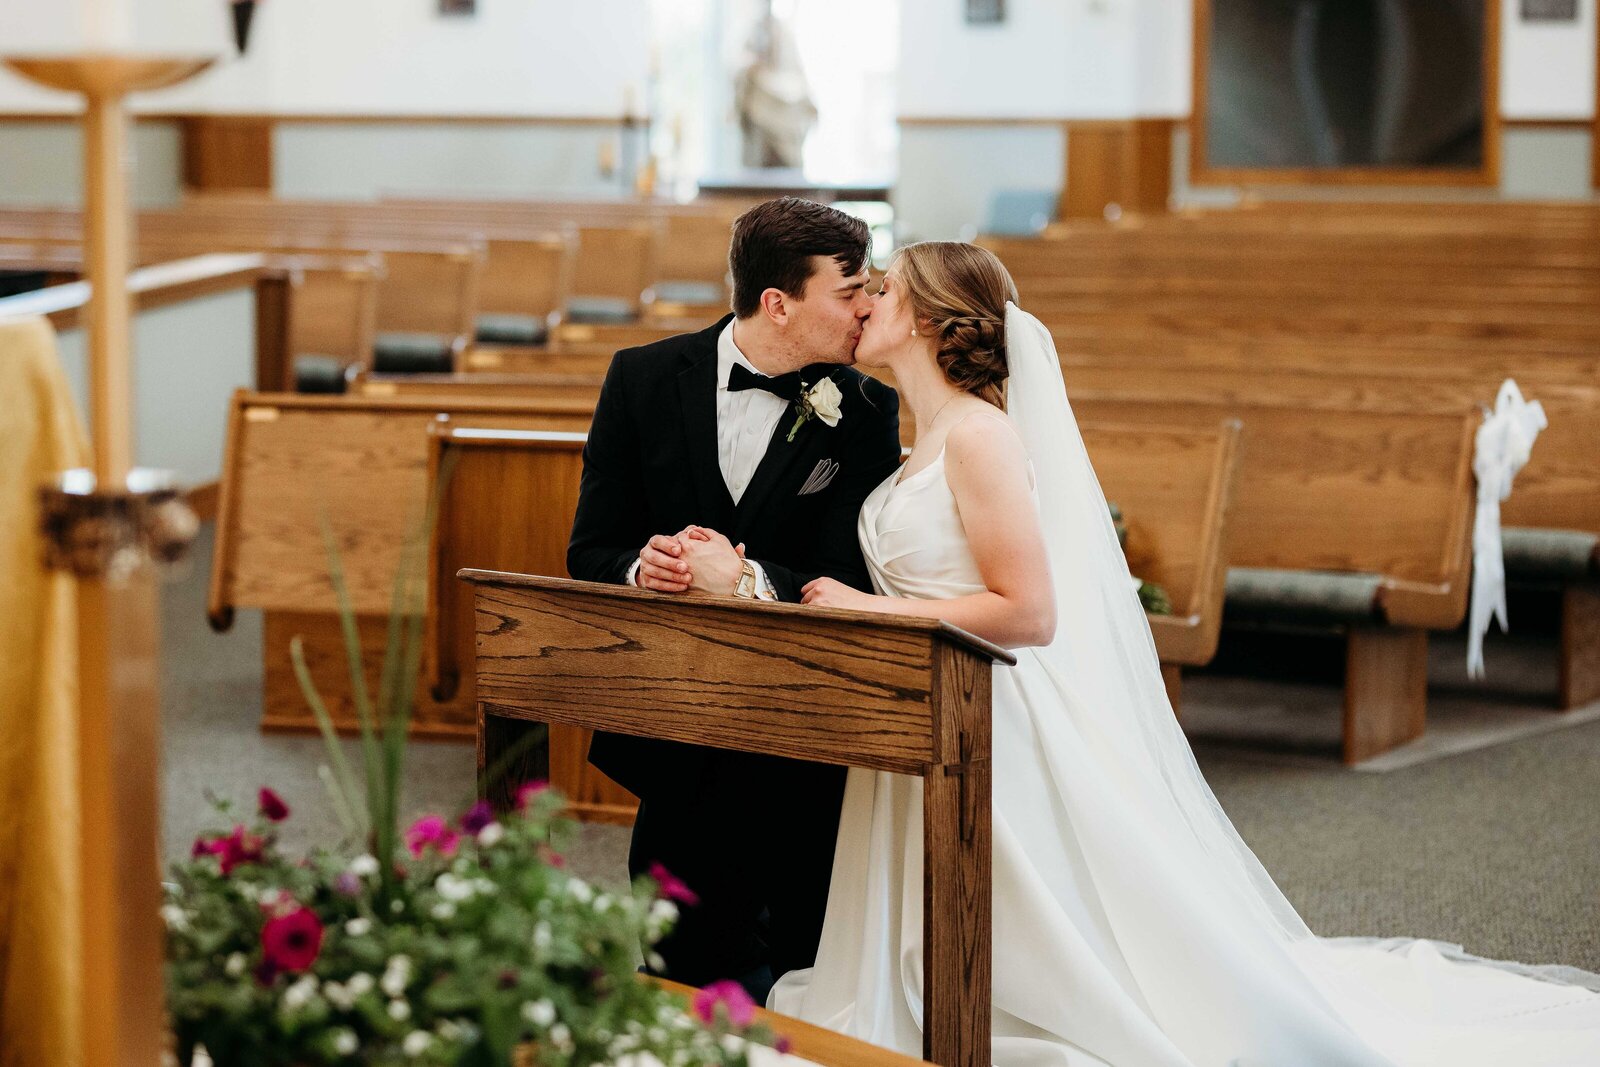 Couple kneeling at the alter, share a passionate kiss